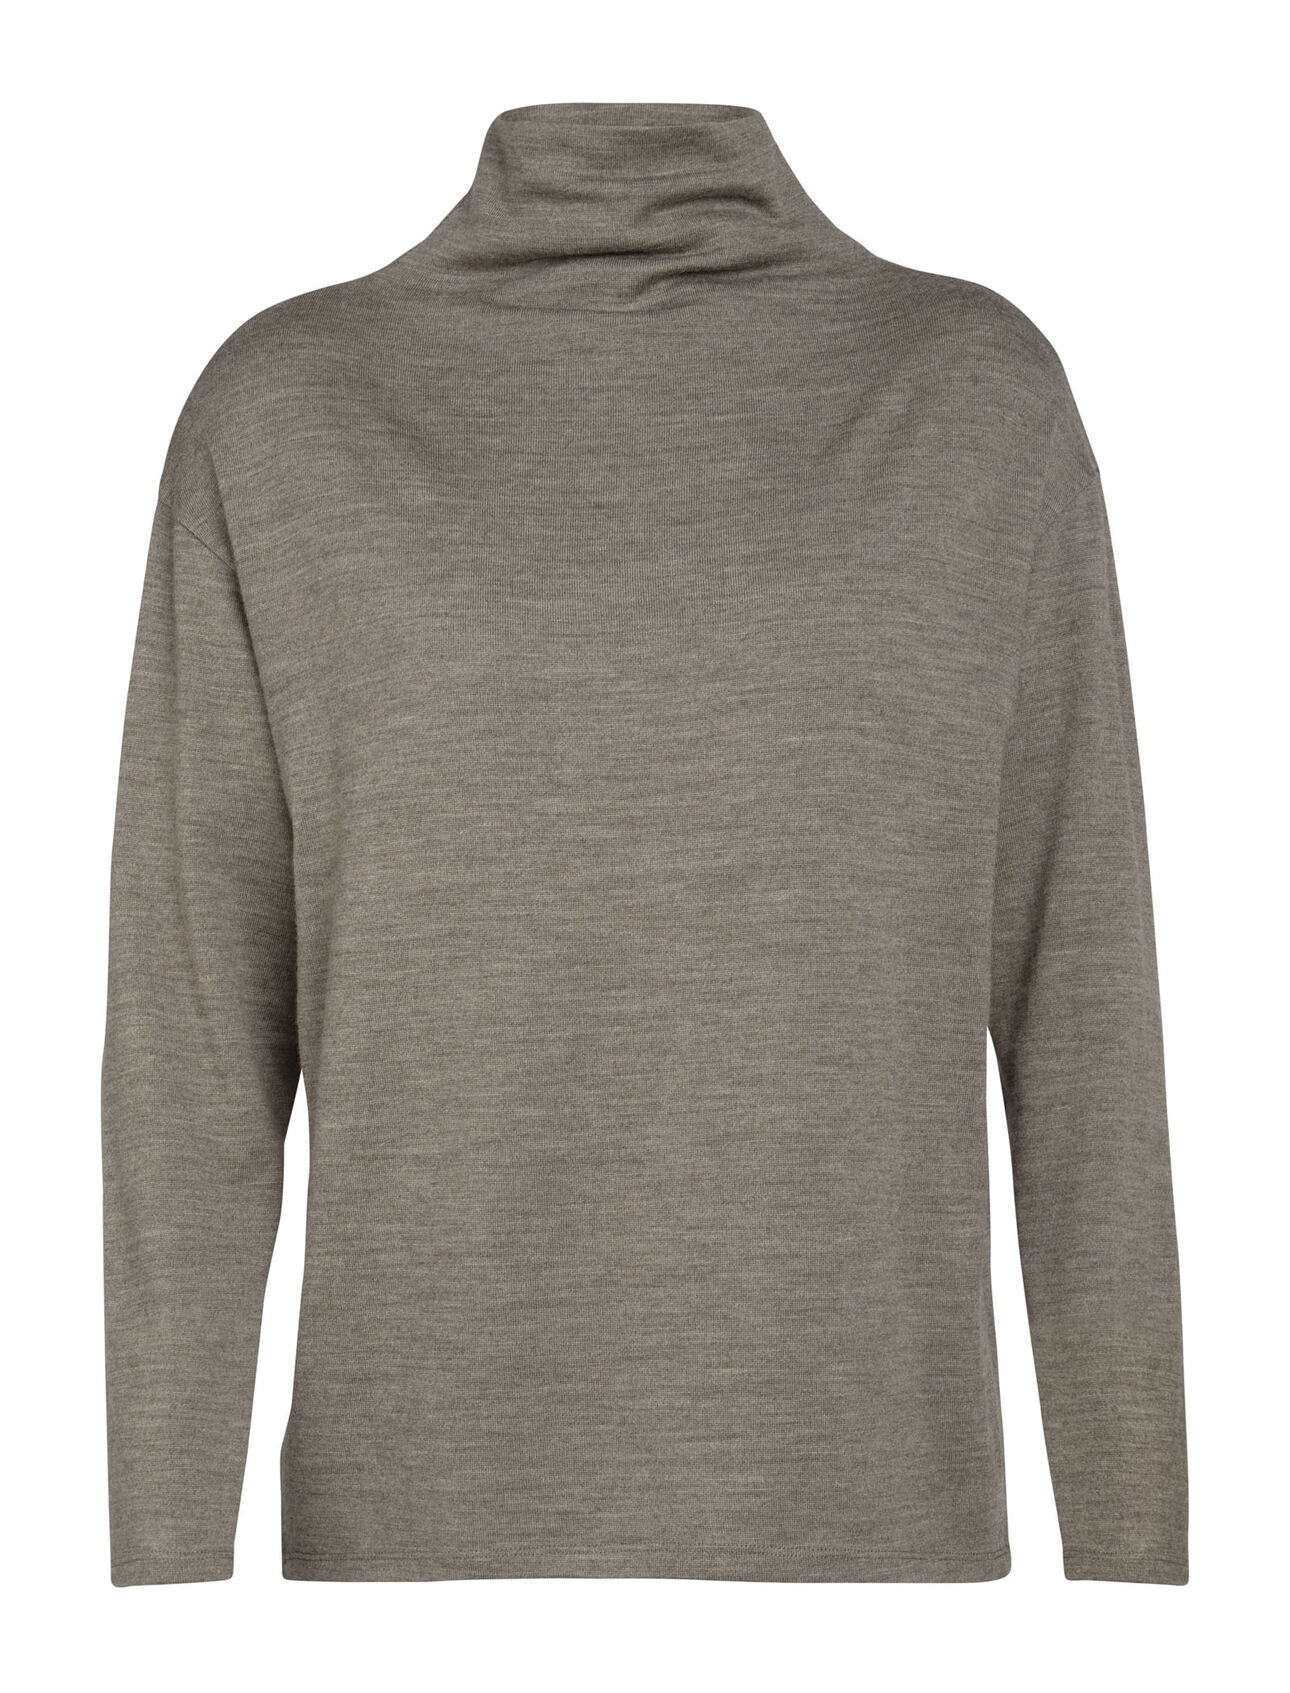 para mujer Merino Deice Long Sleeve Turtleneck Sweater  A modern top with a loose mock-neck design and our 100% merino jersey fabric, the Deice Long Sleeve Turtleneck is versatile, lightweight, and incredibly comfortable.